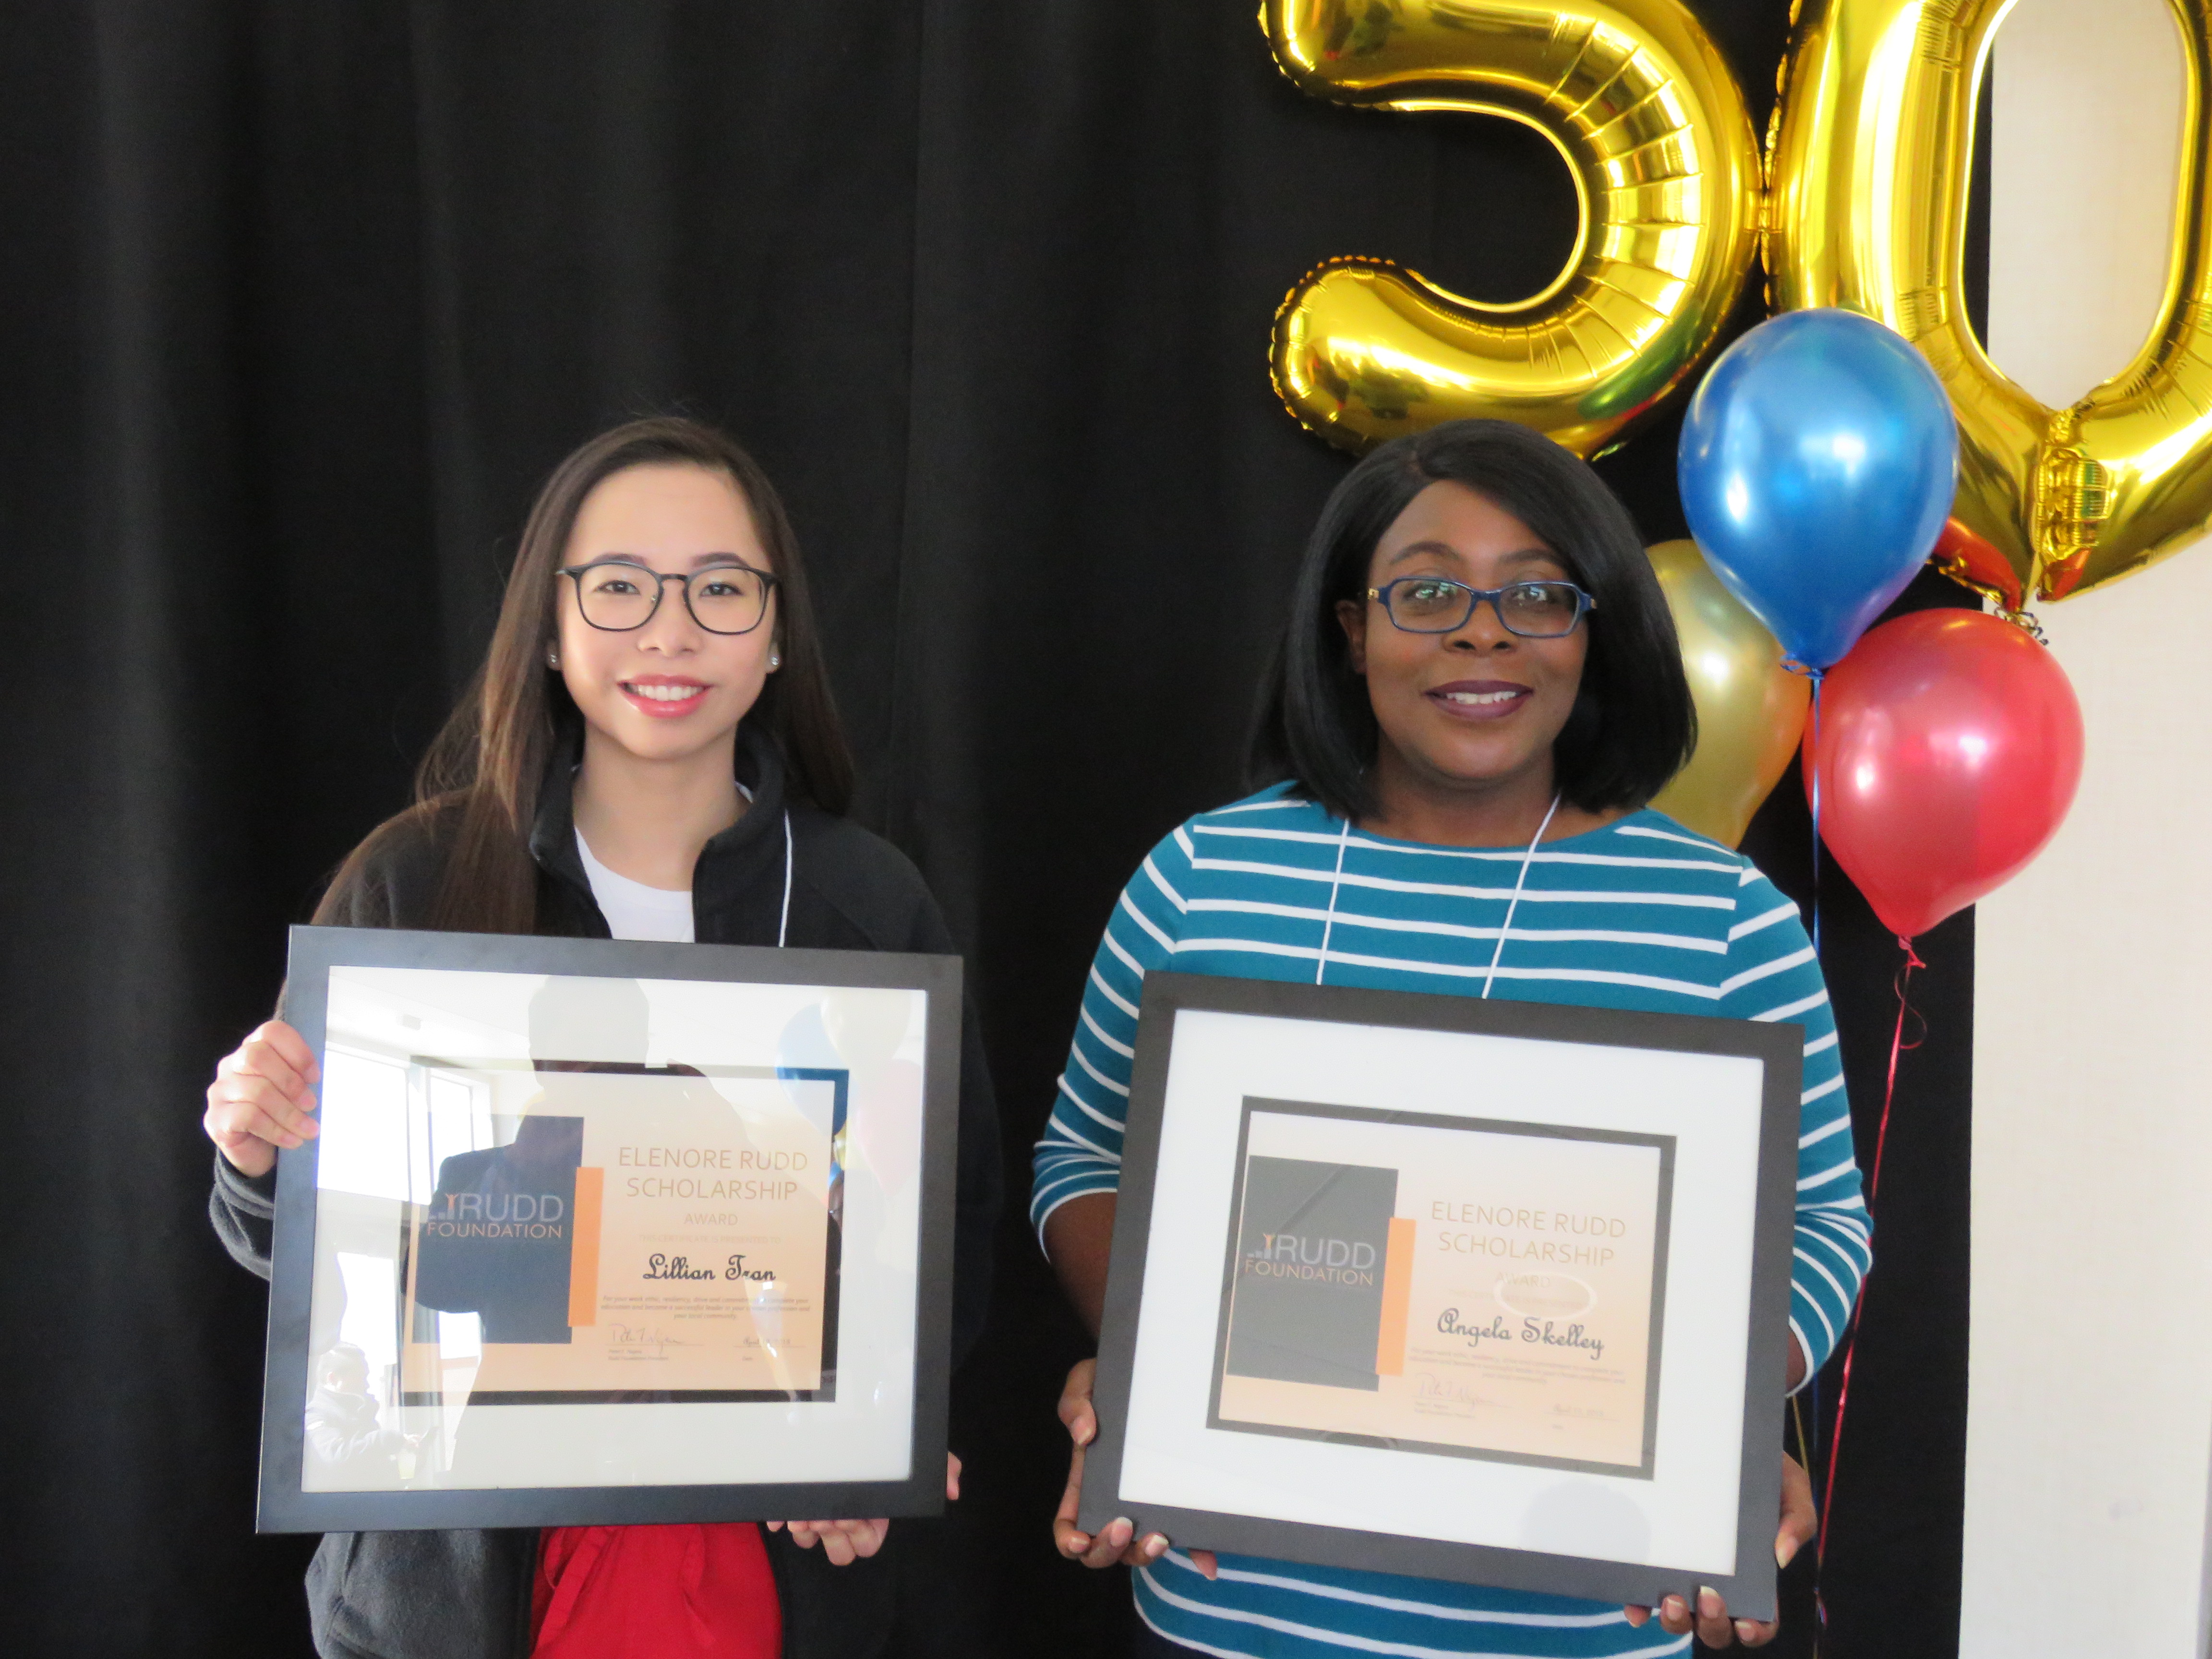 Two students display scholarship awards